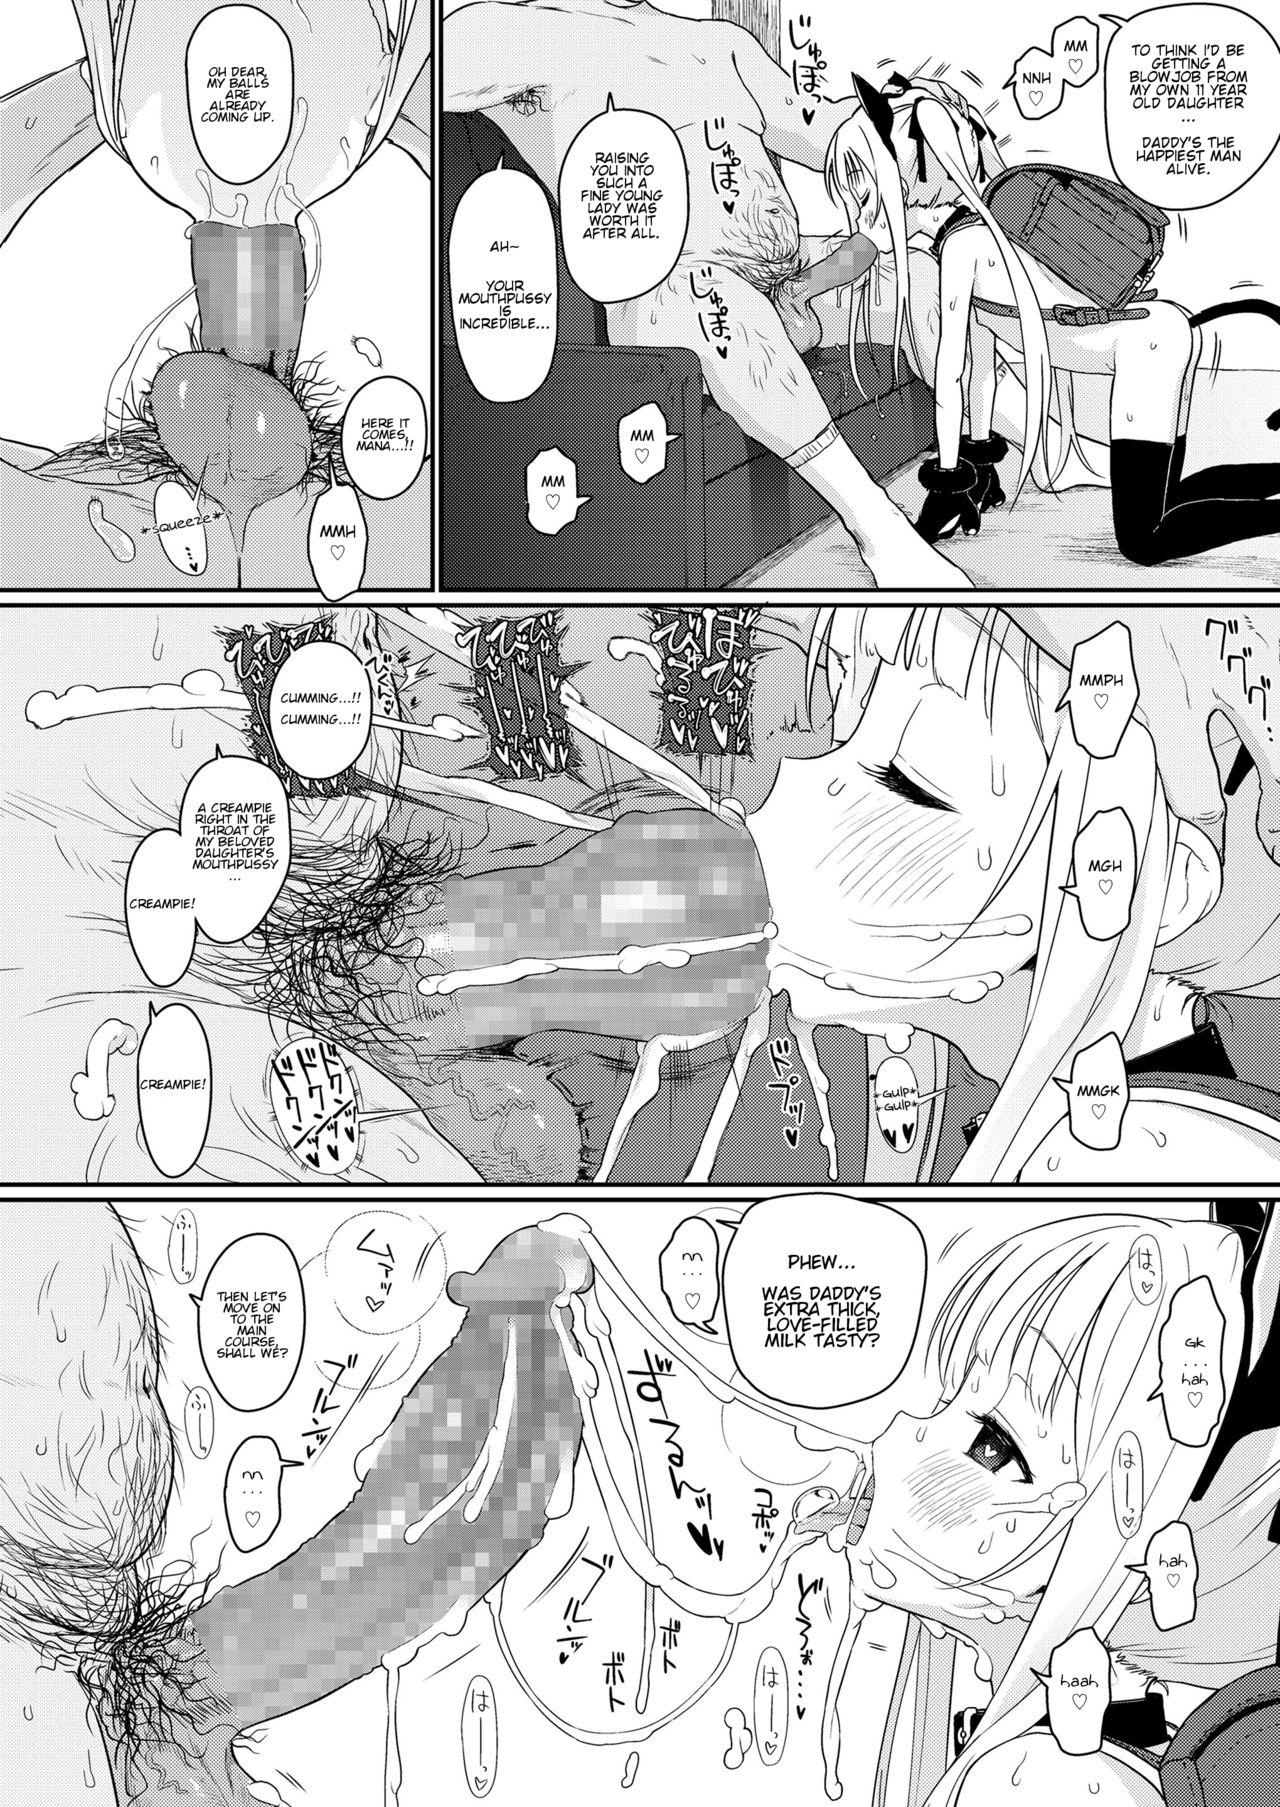 Pussylicking Tadashii Musume no Aishikata | How to Love a Fine Young Daughter Indonesia - Page 6